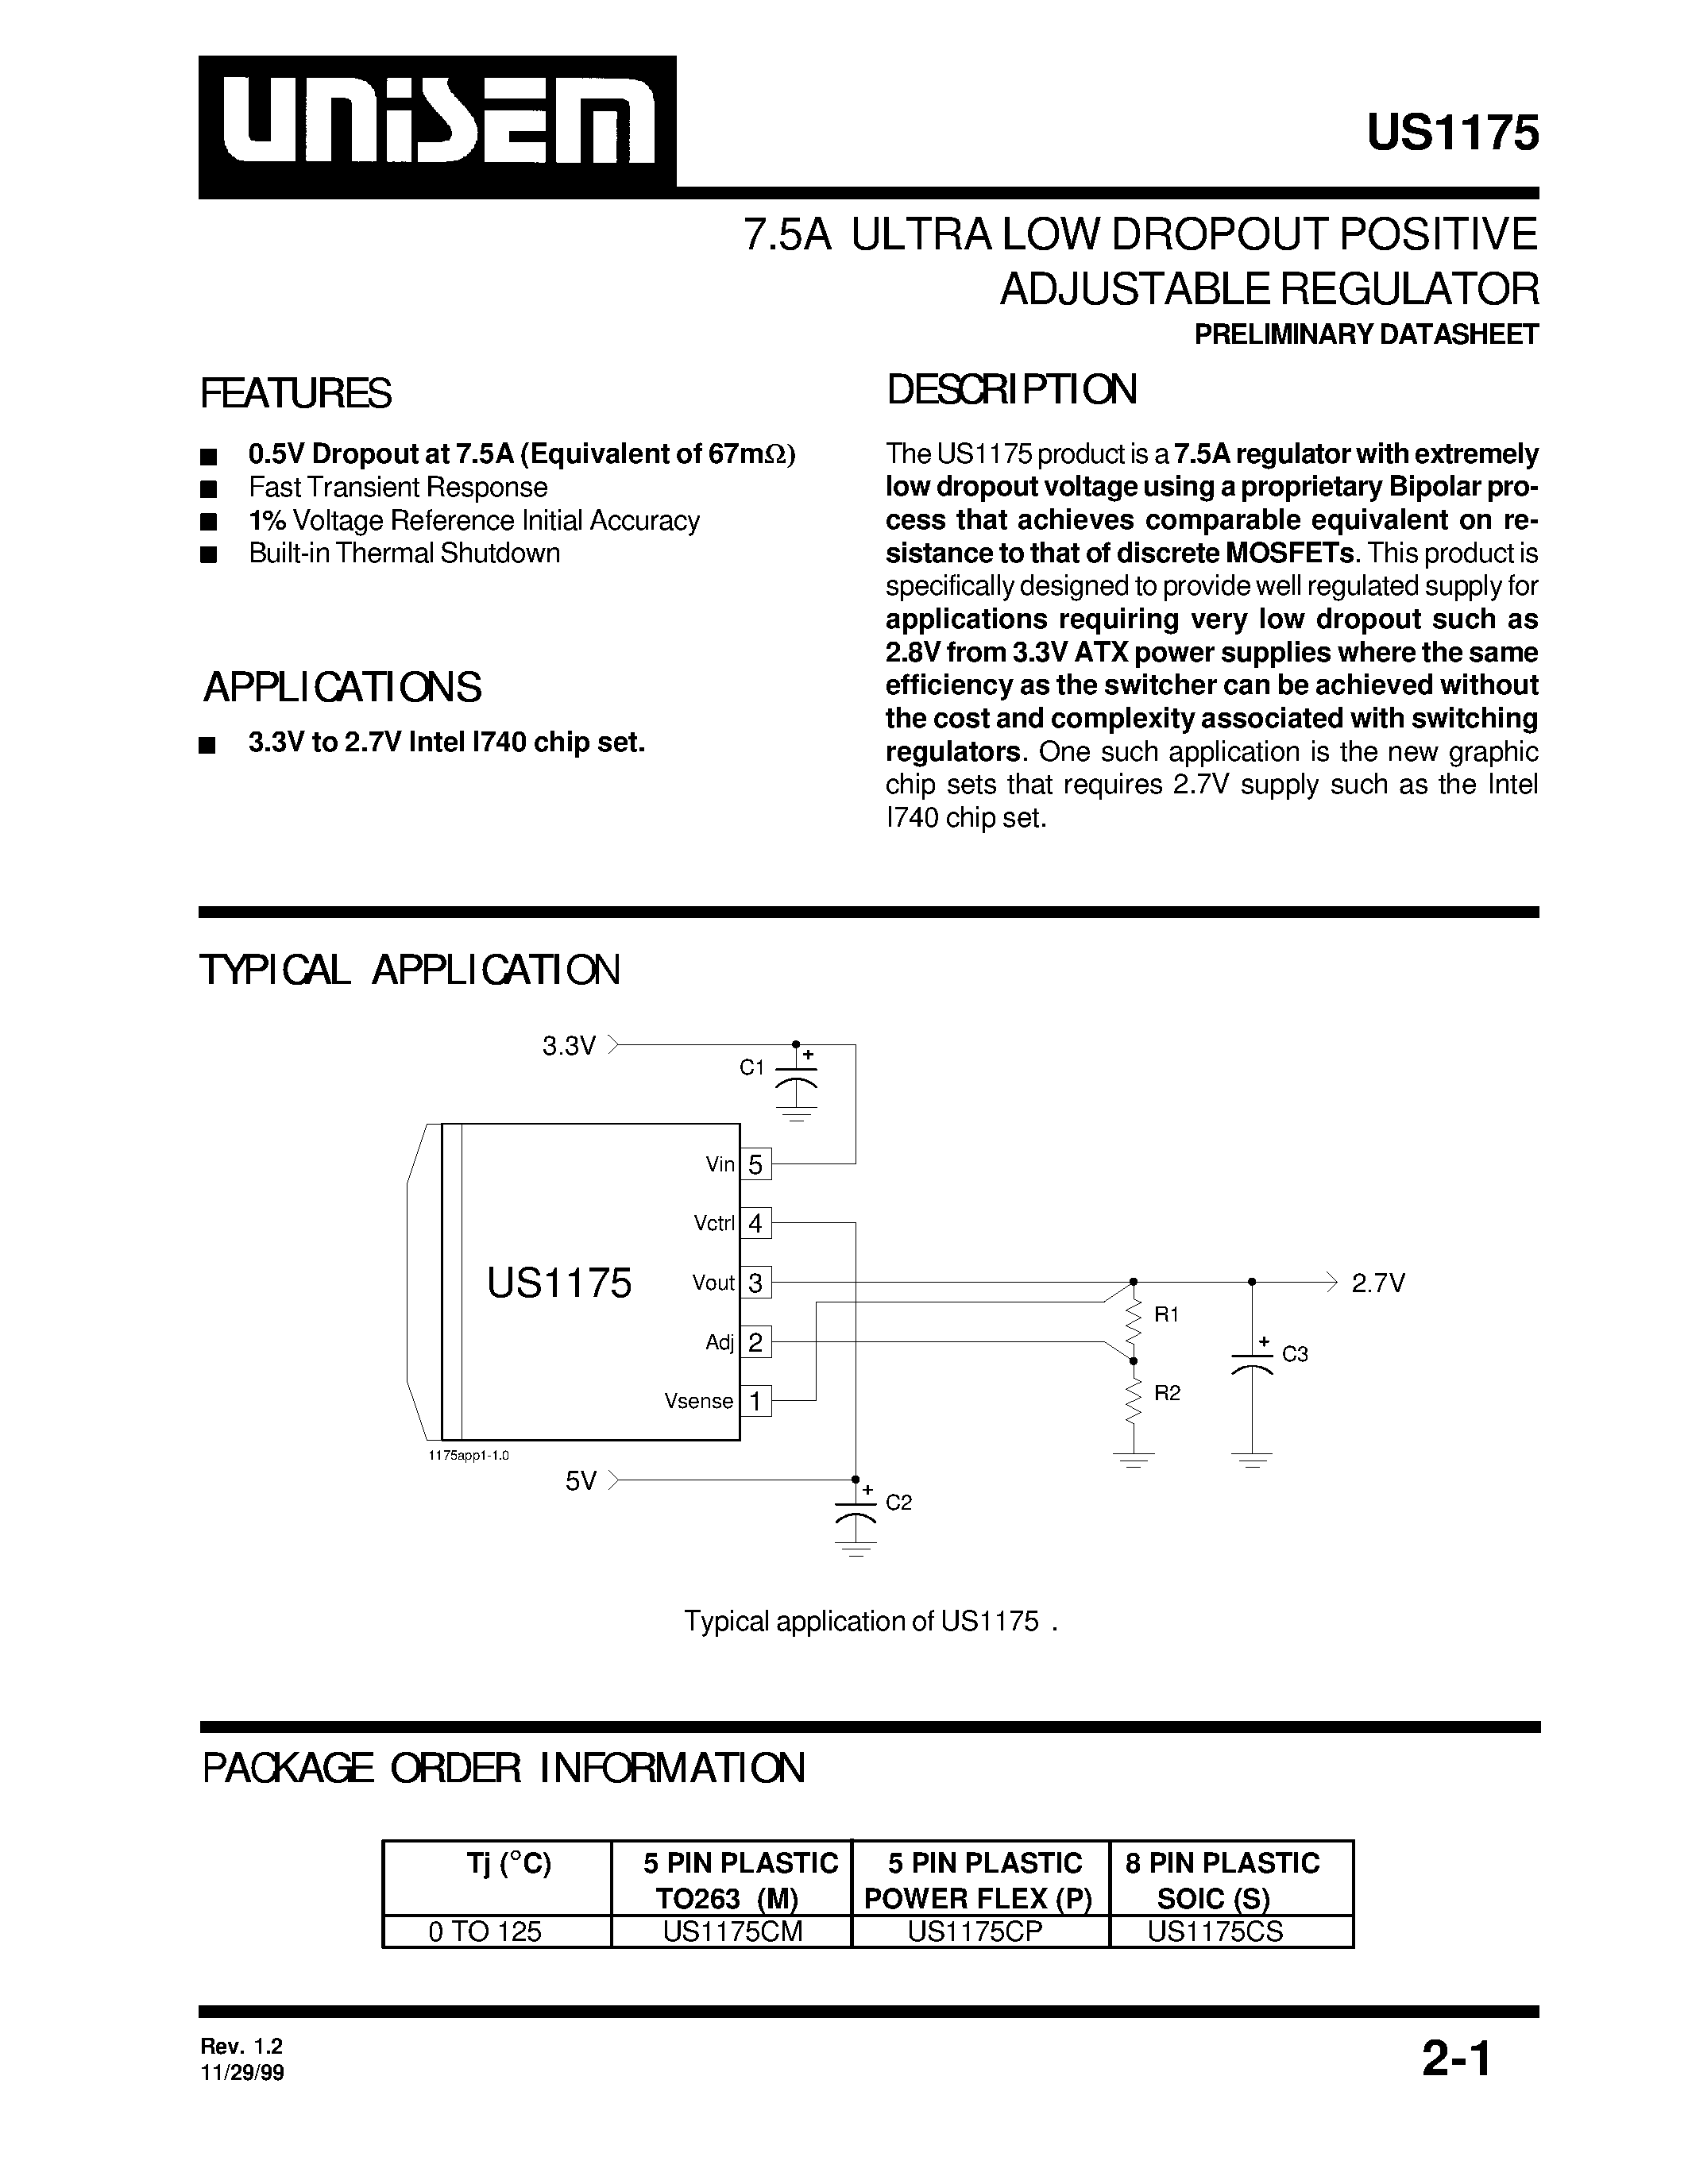 Datasheet US1175CP - 7.5A ULTRA LOW DROPOUT POSITIVE ADJUSTABLE REGULATOR page 1